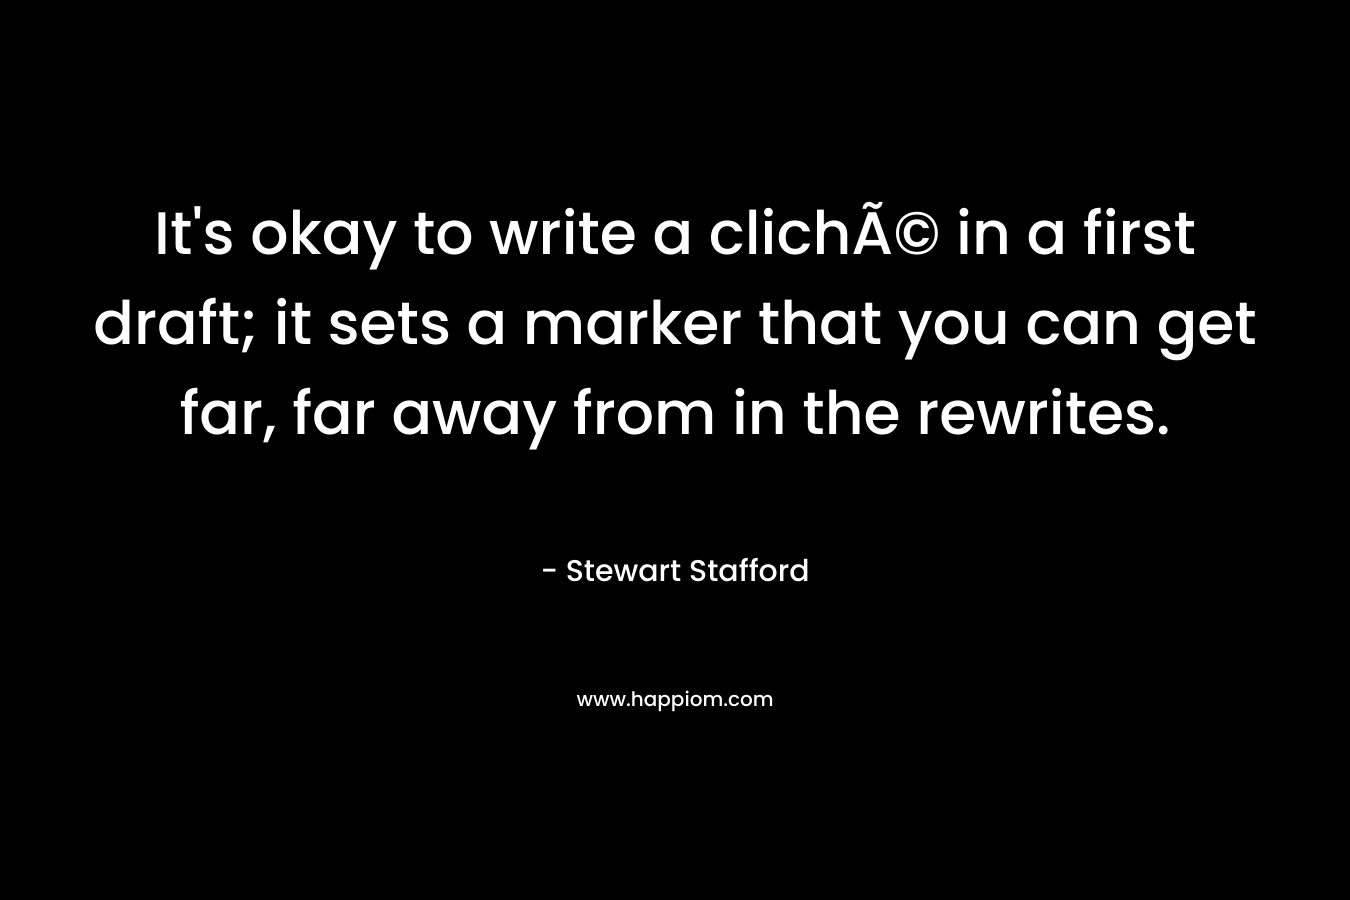 It's okay to write a clichÃ© in a first draft; it sets a marker that you can get far, far away from in the rewrites.